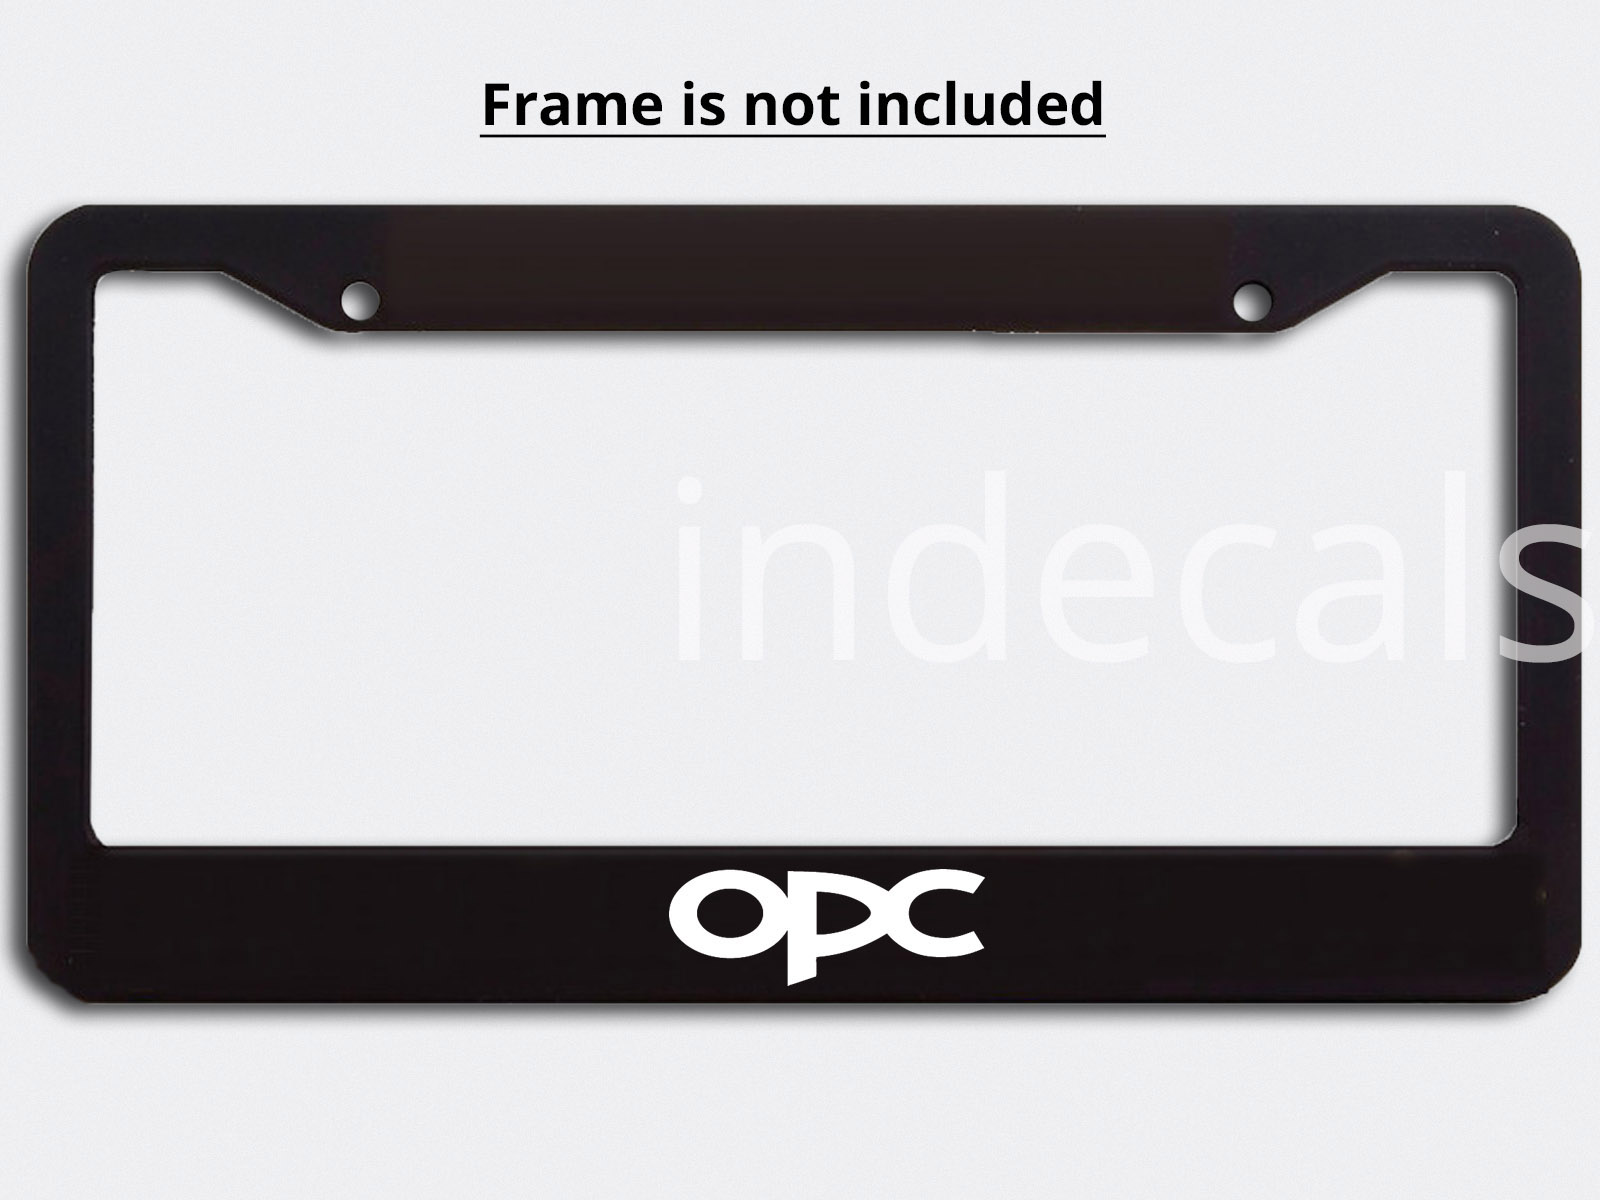 3 x Opel OPC Stickers for License Plate Frame - White